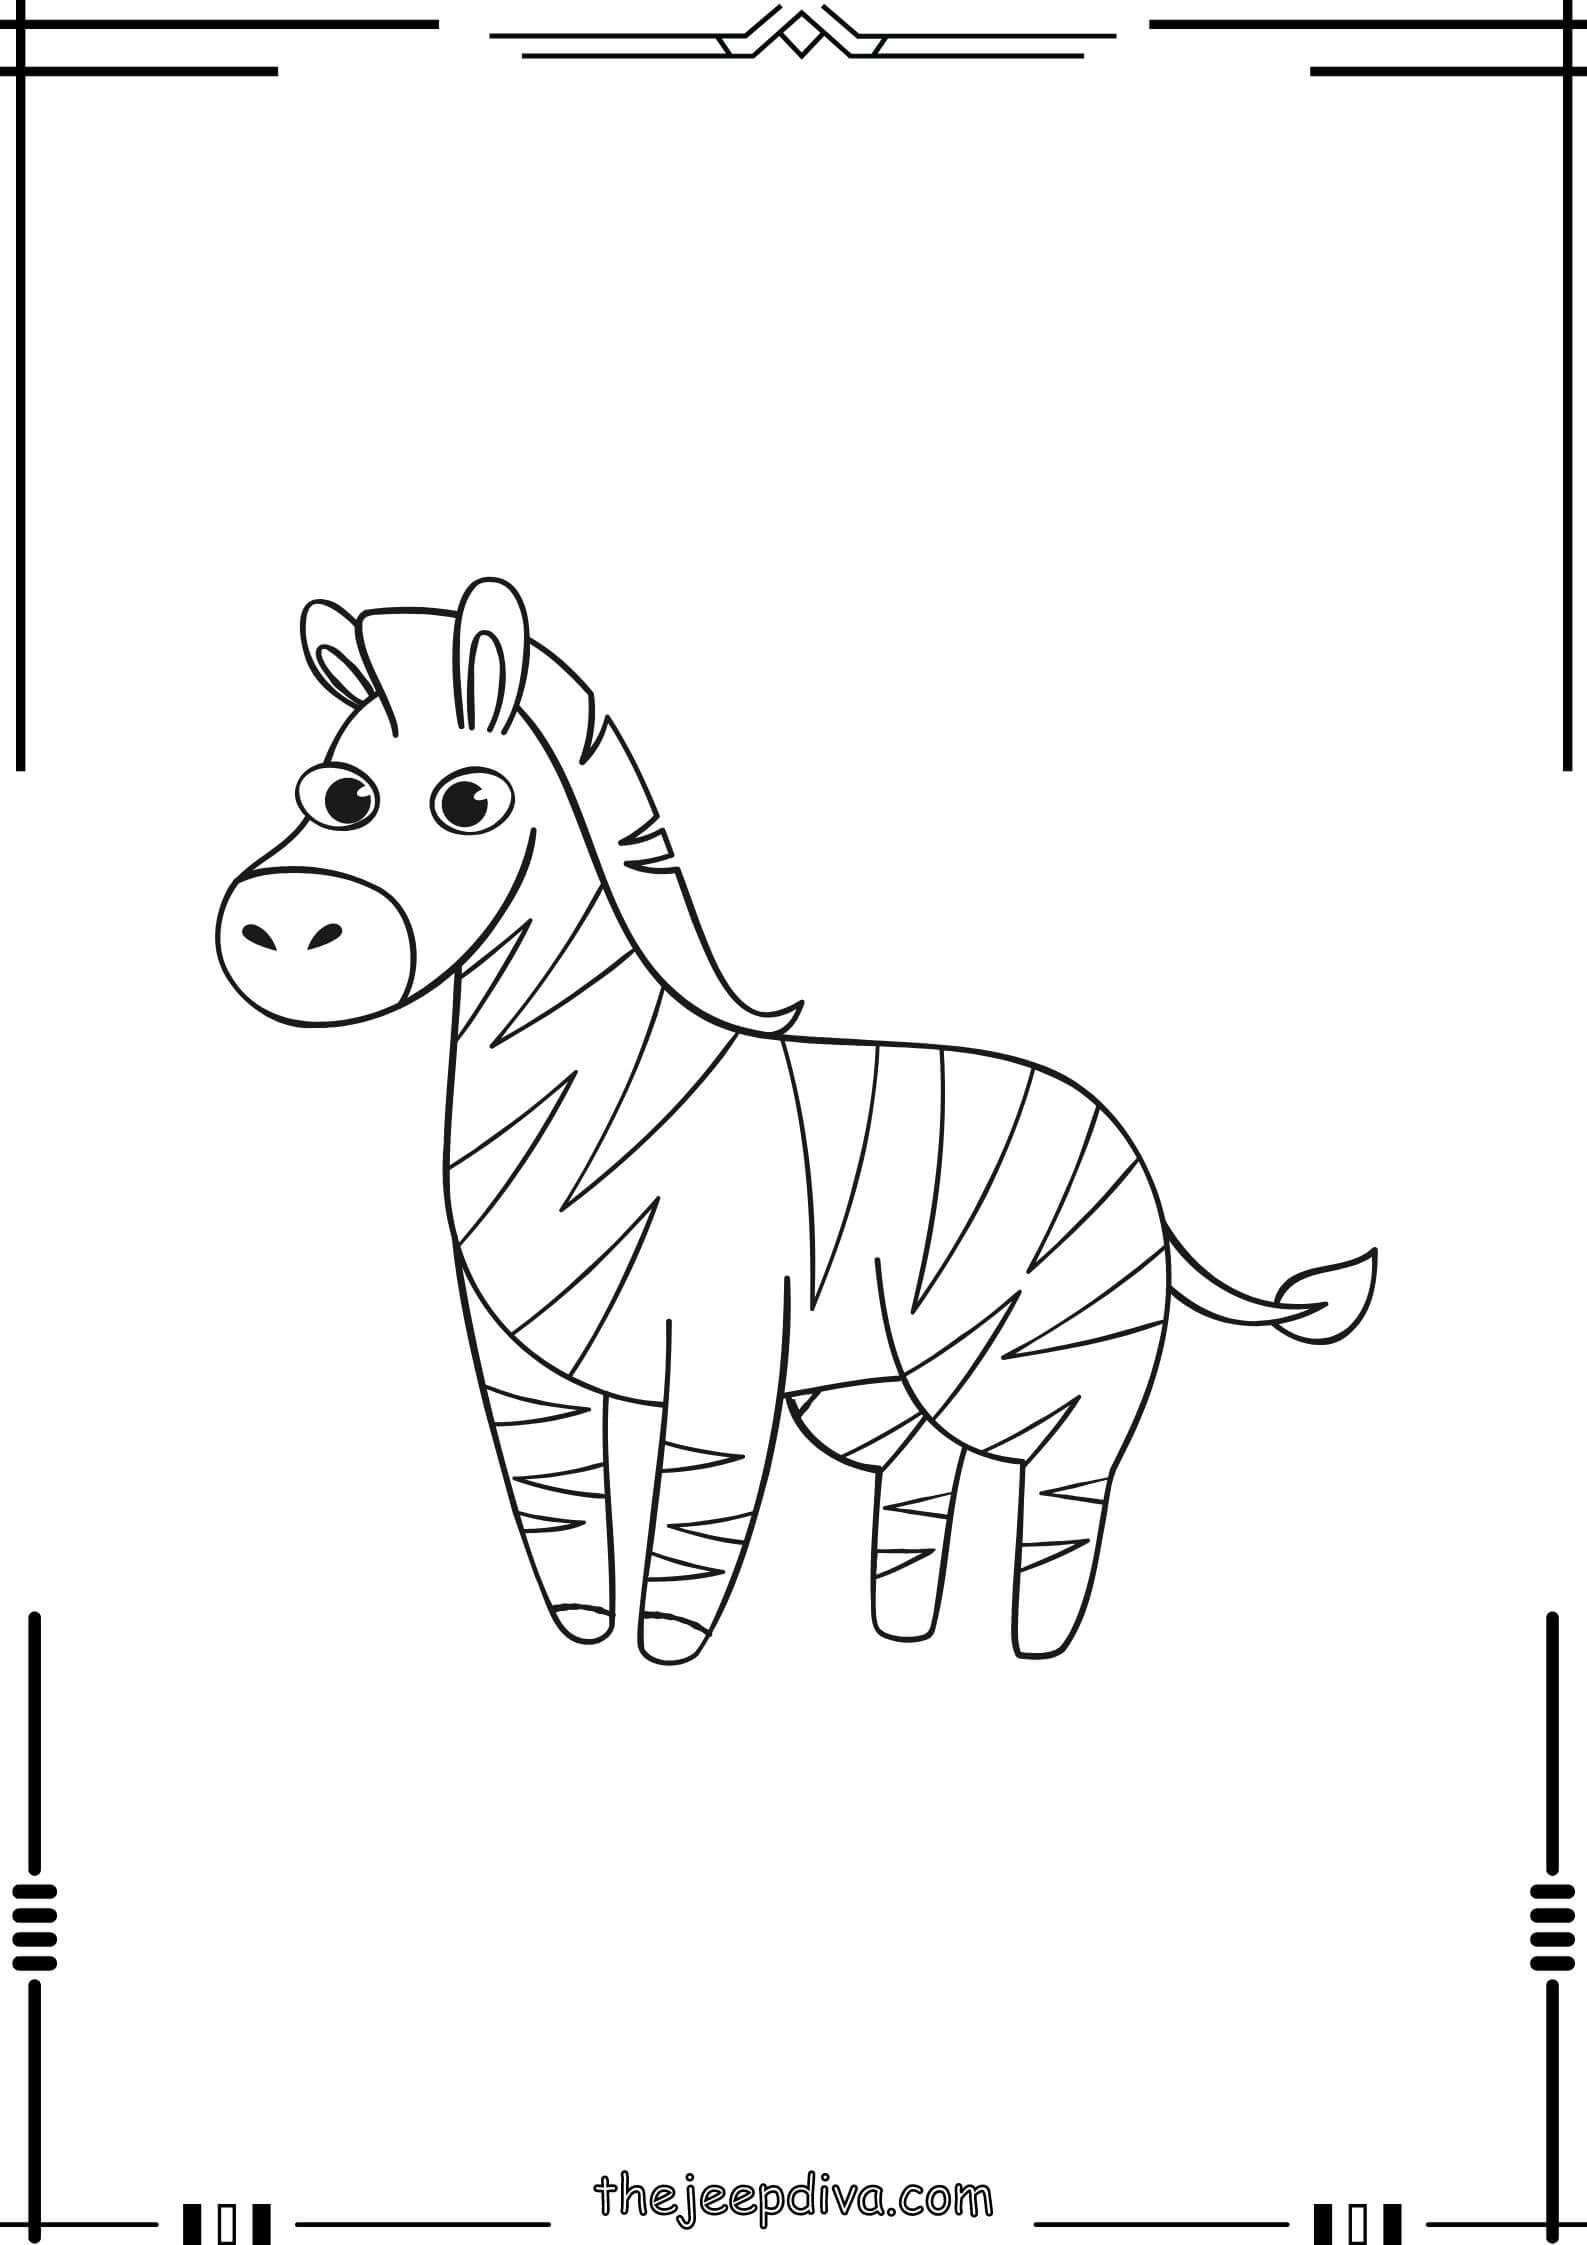 Horse-Colouring-Pages-Easy-13